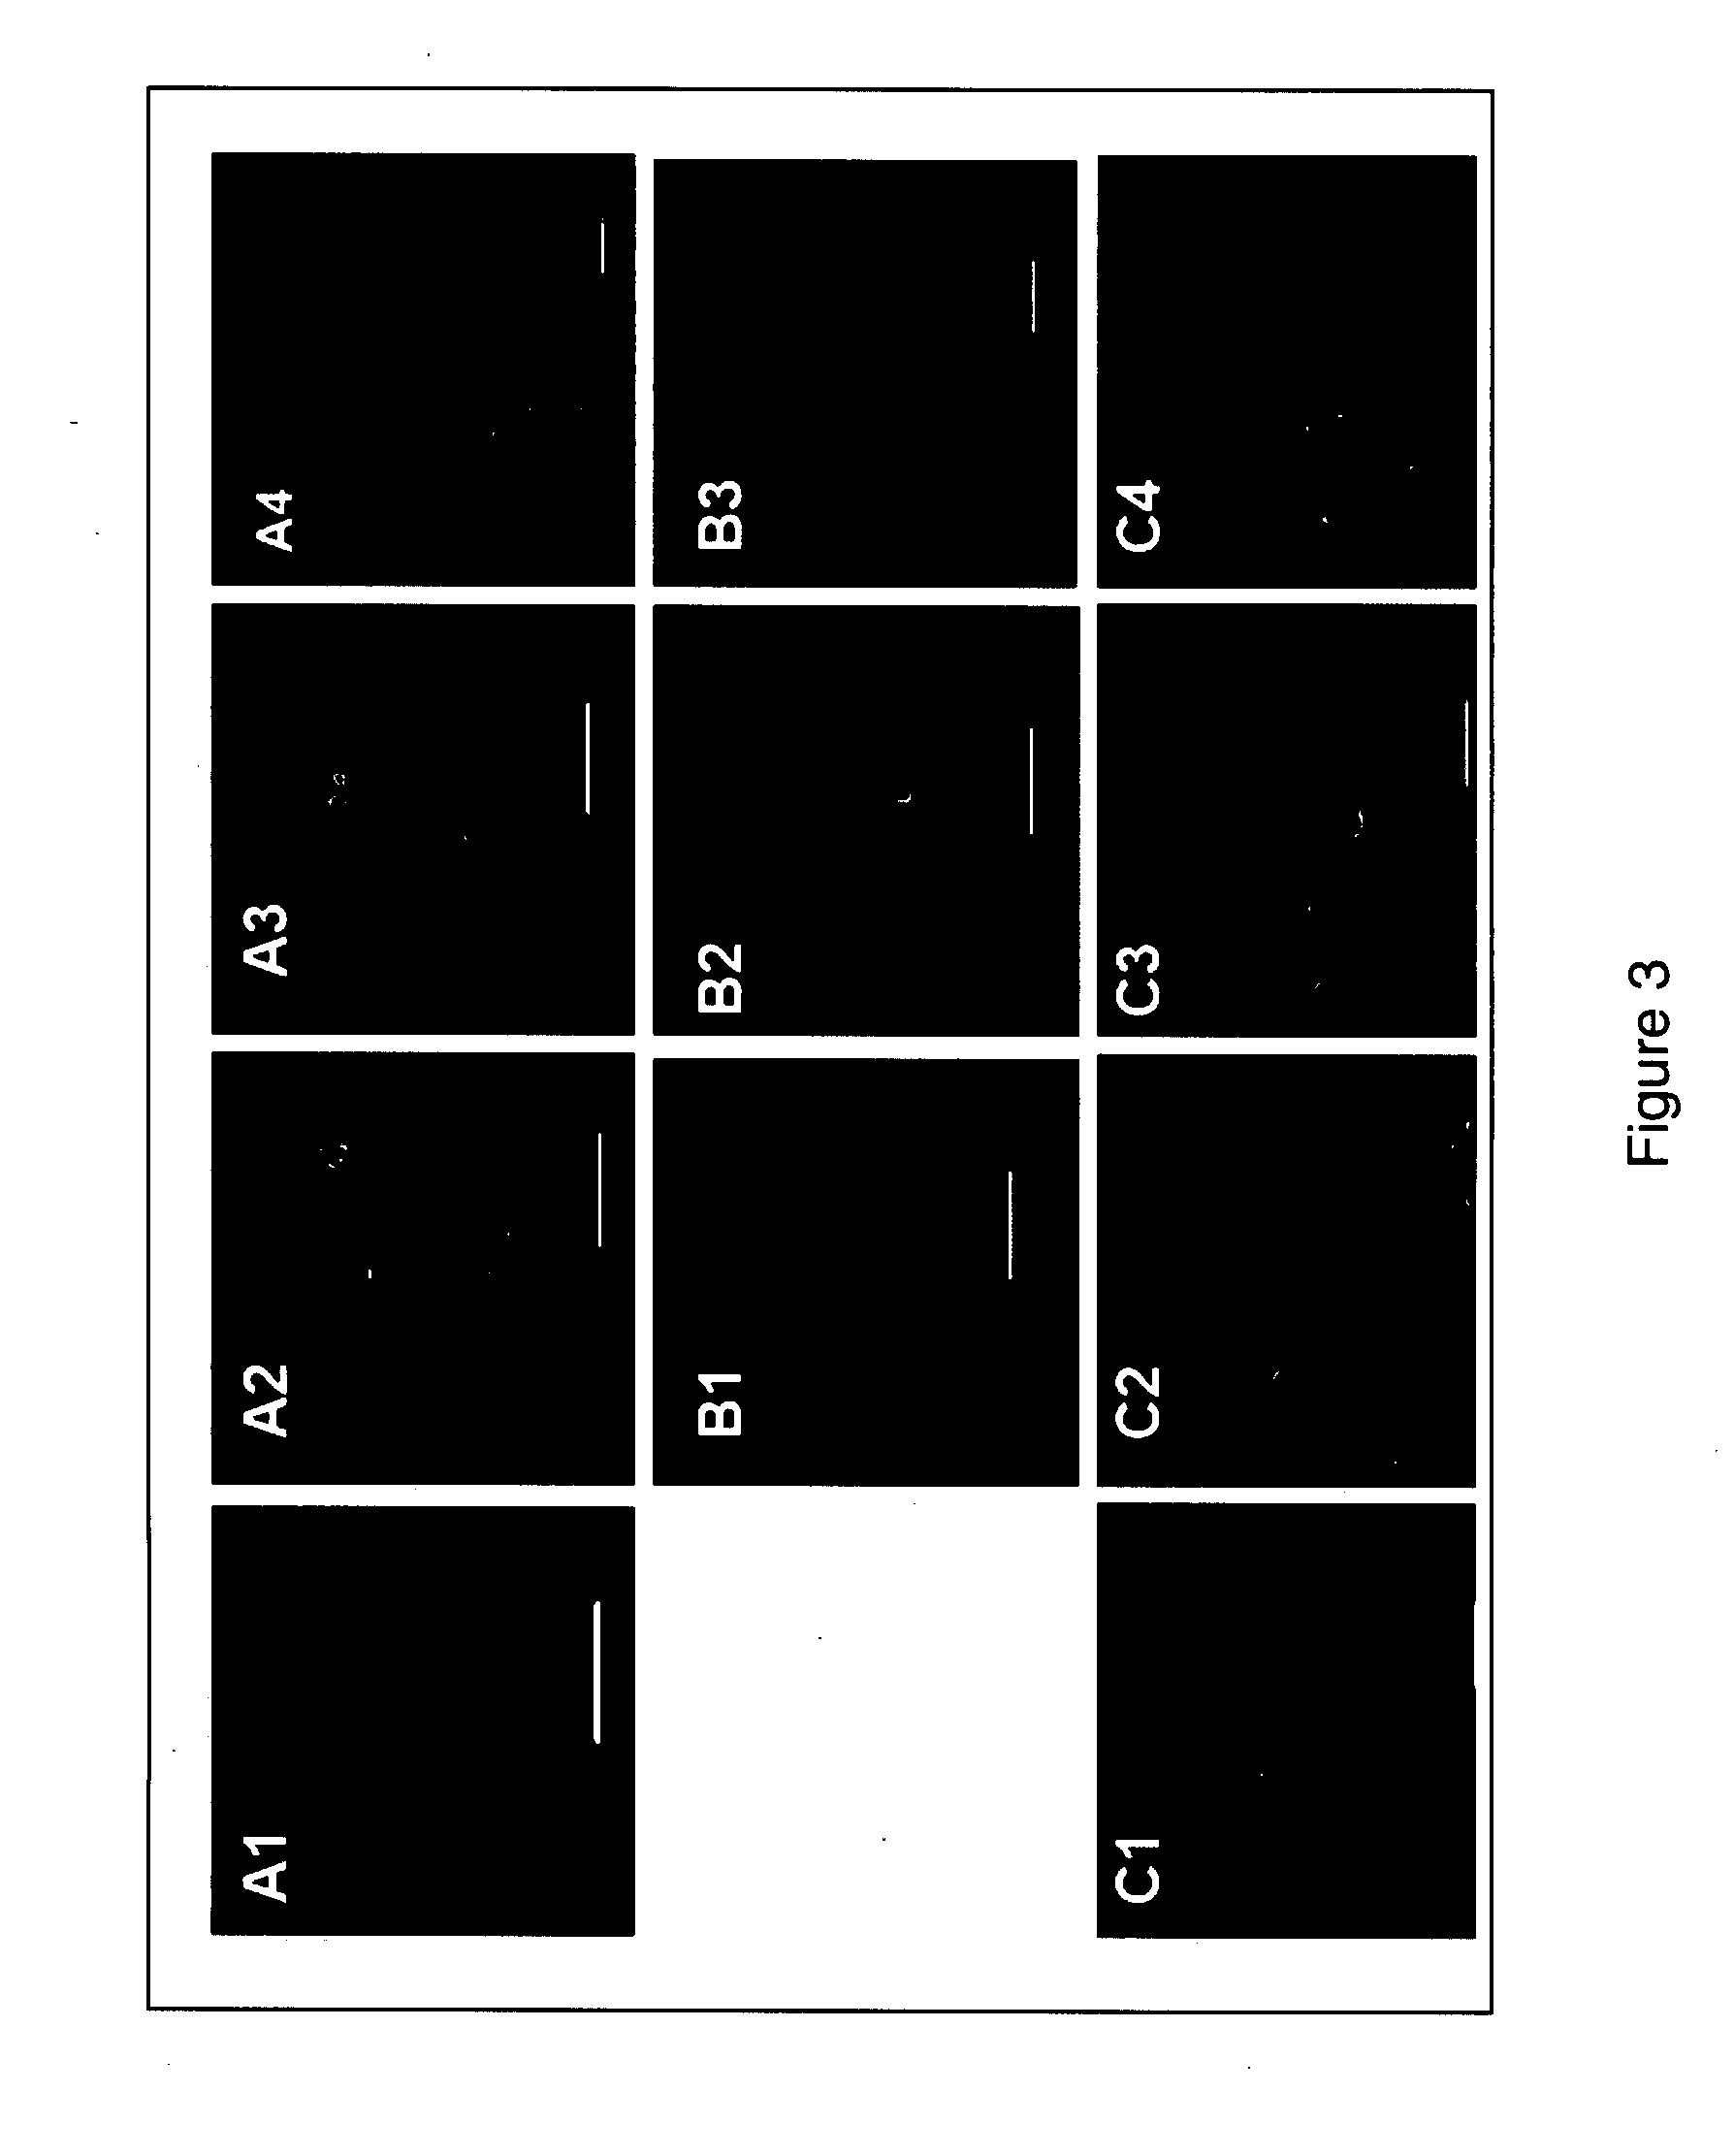 Method of deriving pluripotent stem cells from a single blastomere